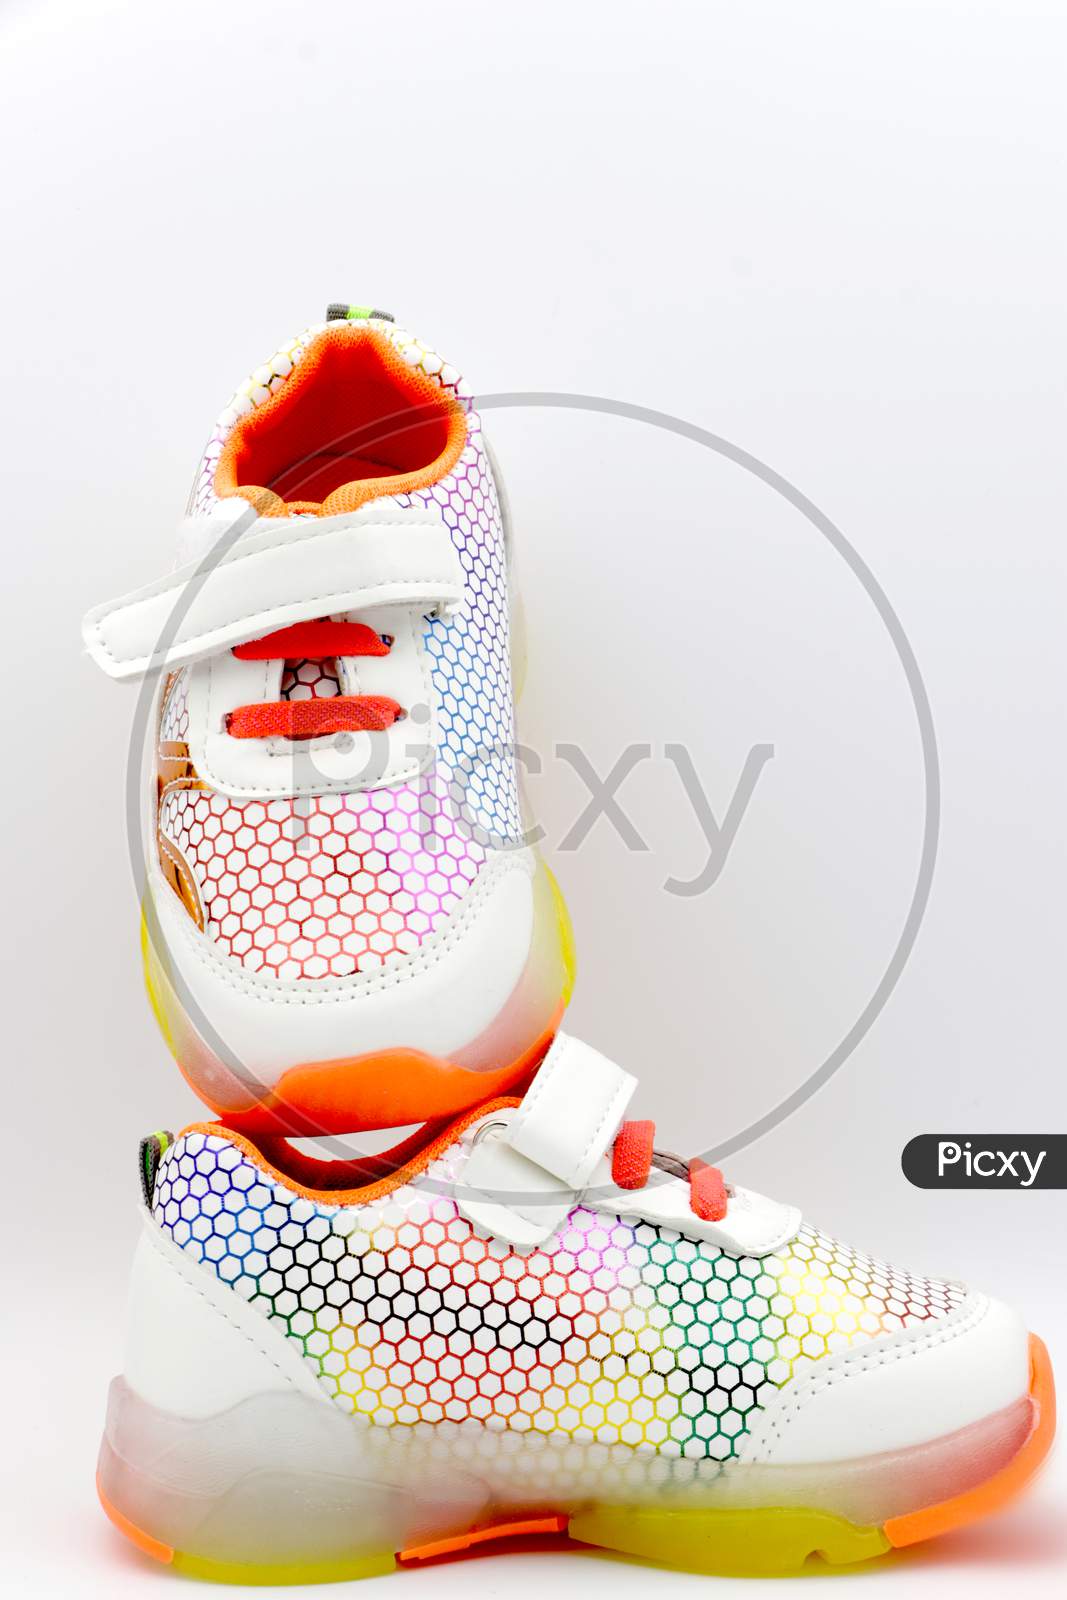 Pair Of Small Boys Shoes Isolated On A White Background, Shoe On A White Background